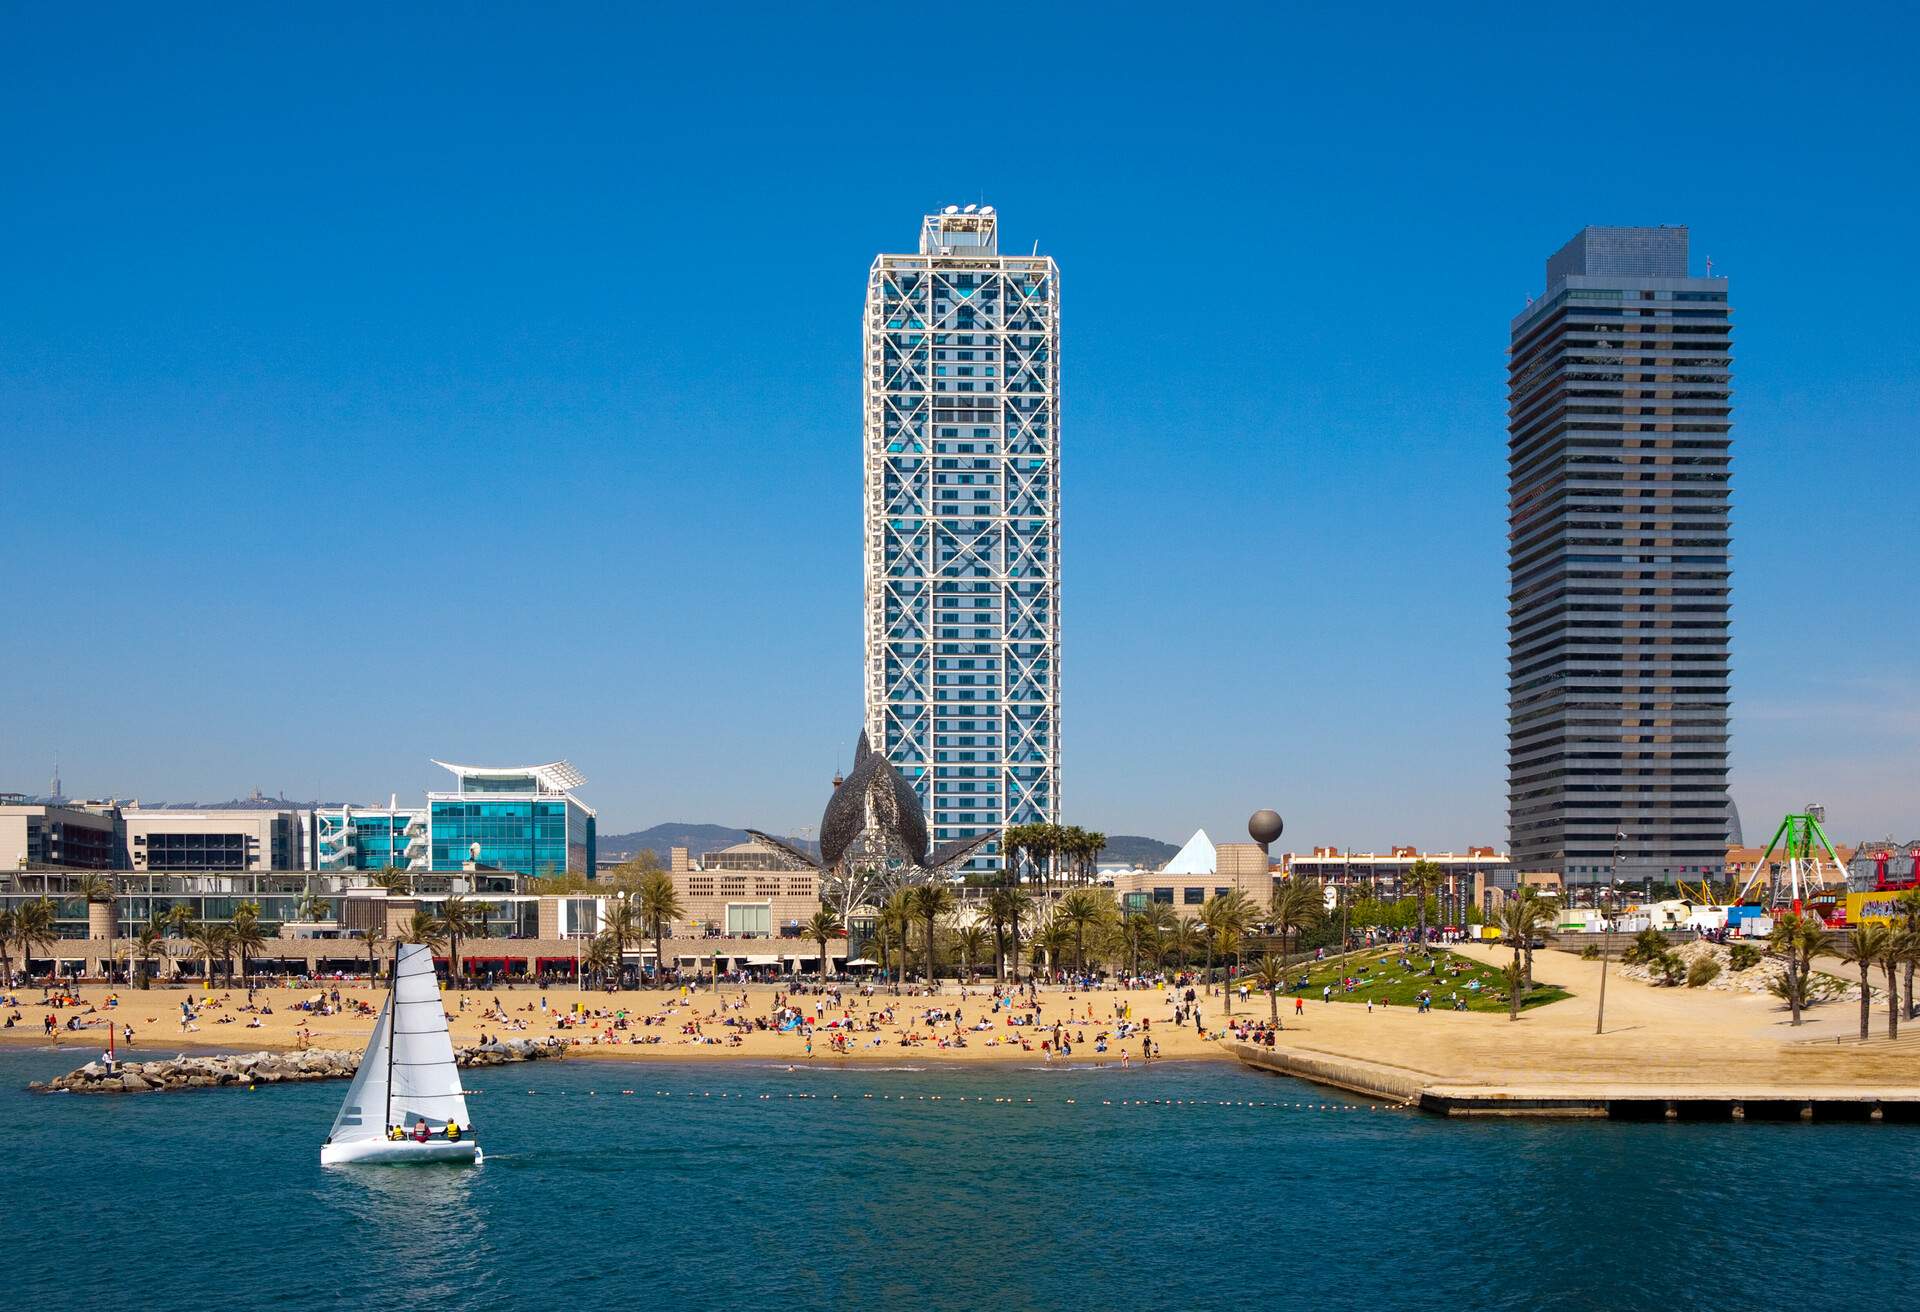 Two tall skyscrapers and other structures along the coast of a populated beach.